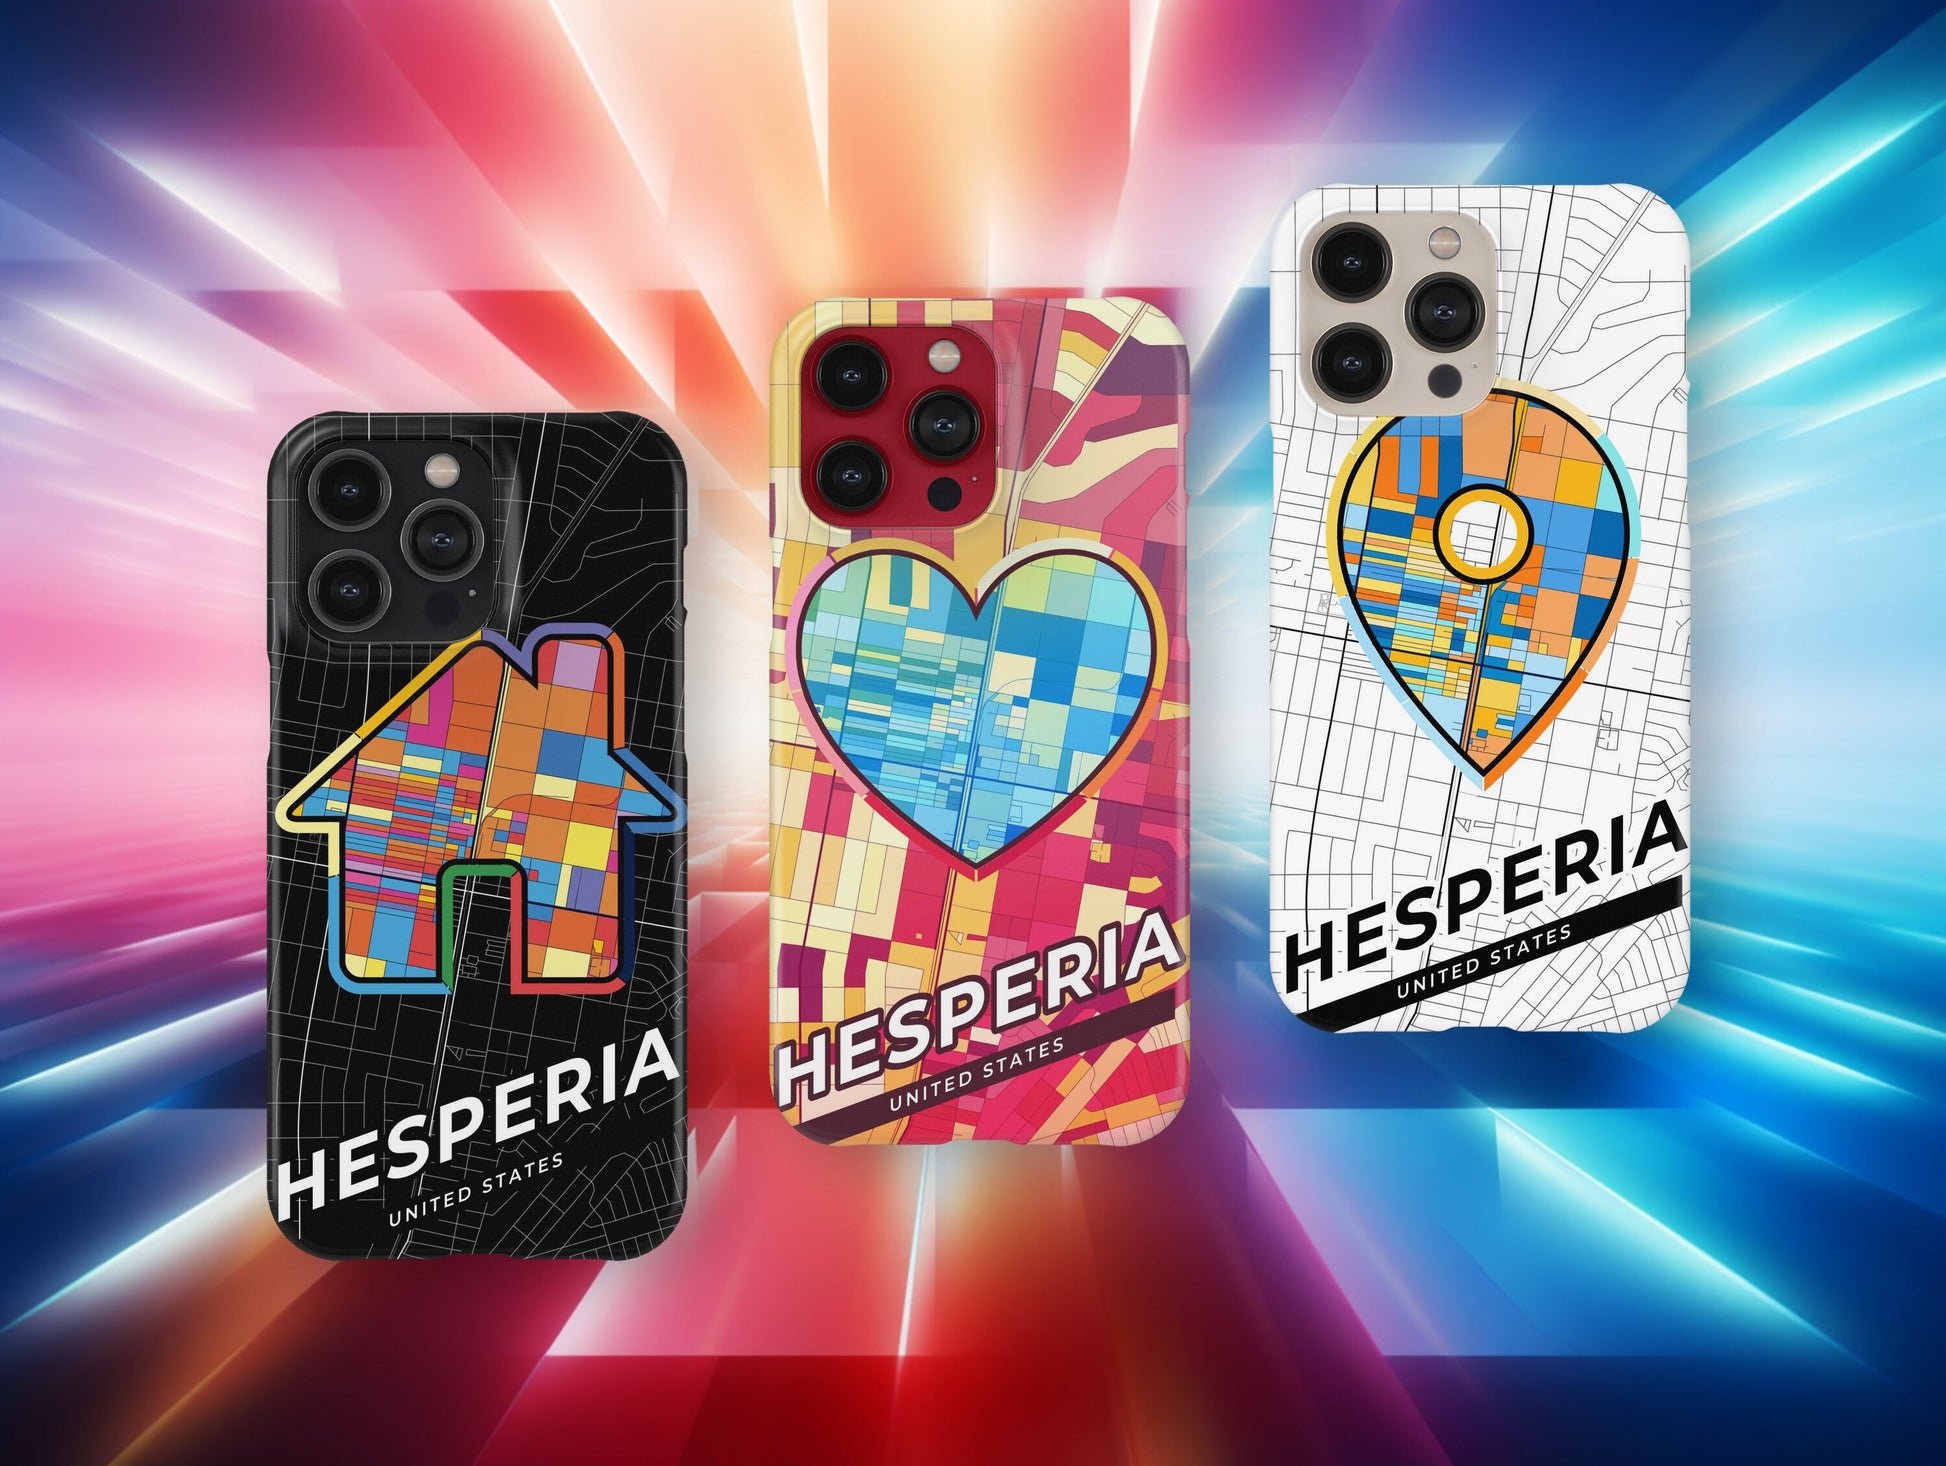 Hesperia California slim phone case with colorful icon. Birthday, wedding or housewarming gift. Couple match cases.